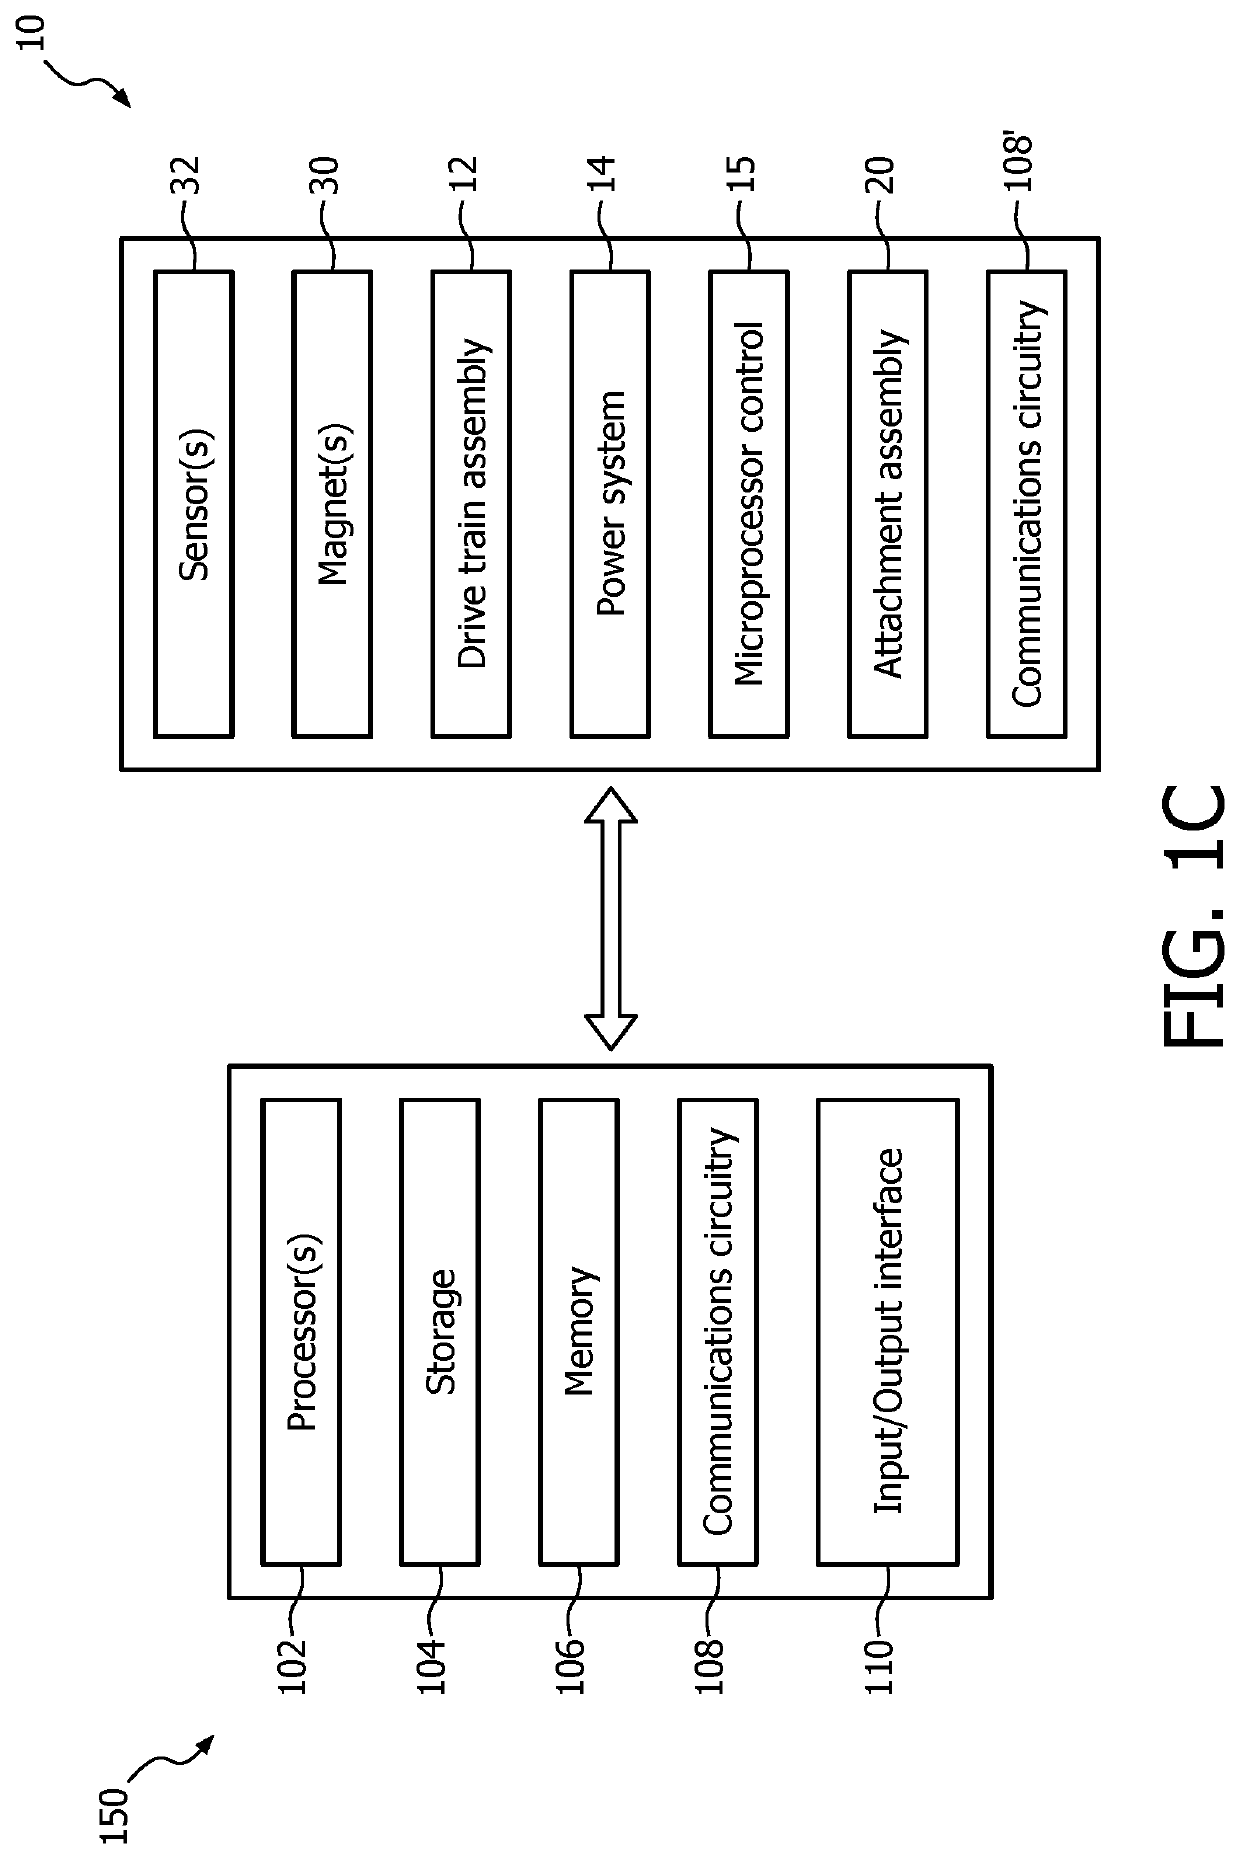 Methods and systems for extracting brushing motion characteristics of a user using an oral hygiene device including at least one accelerometer to provide feedback to a user